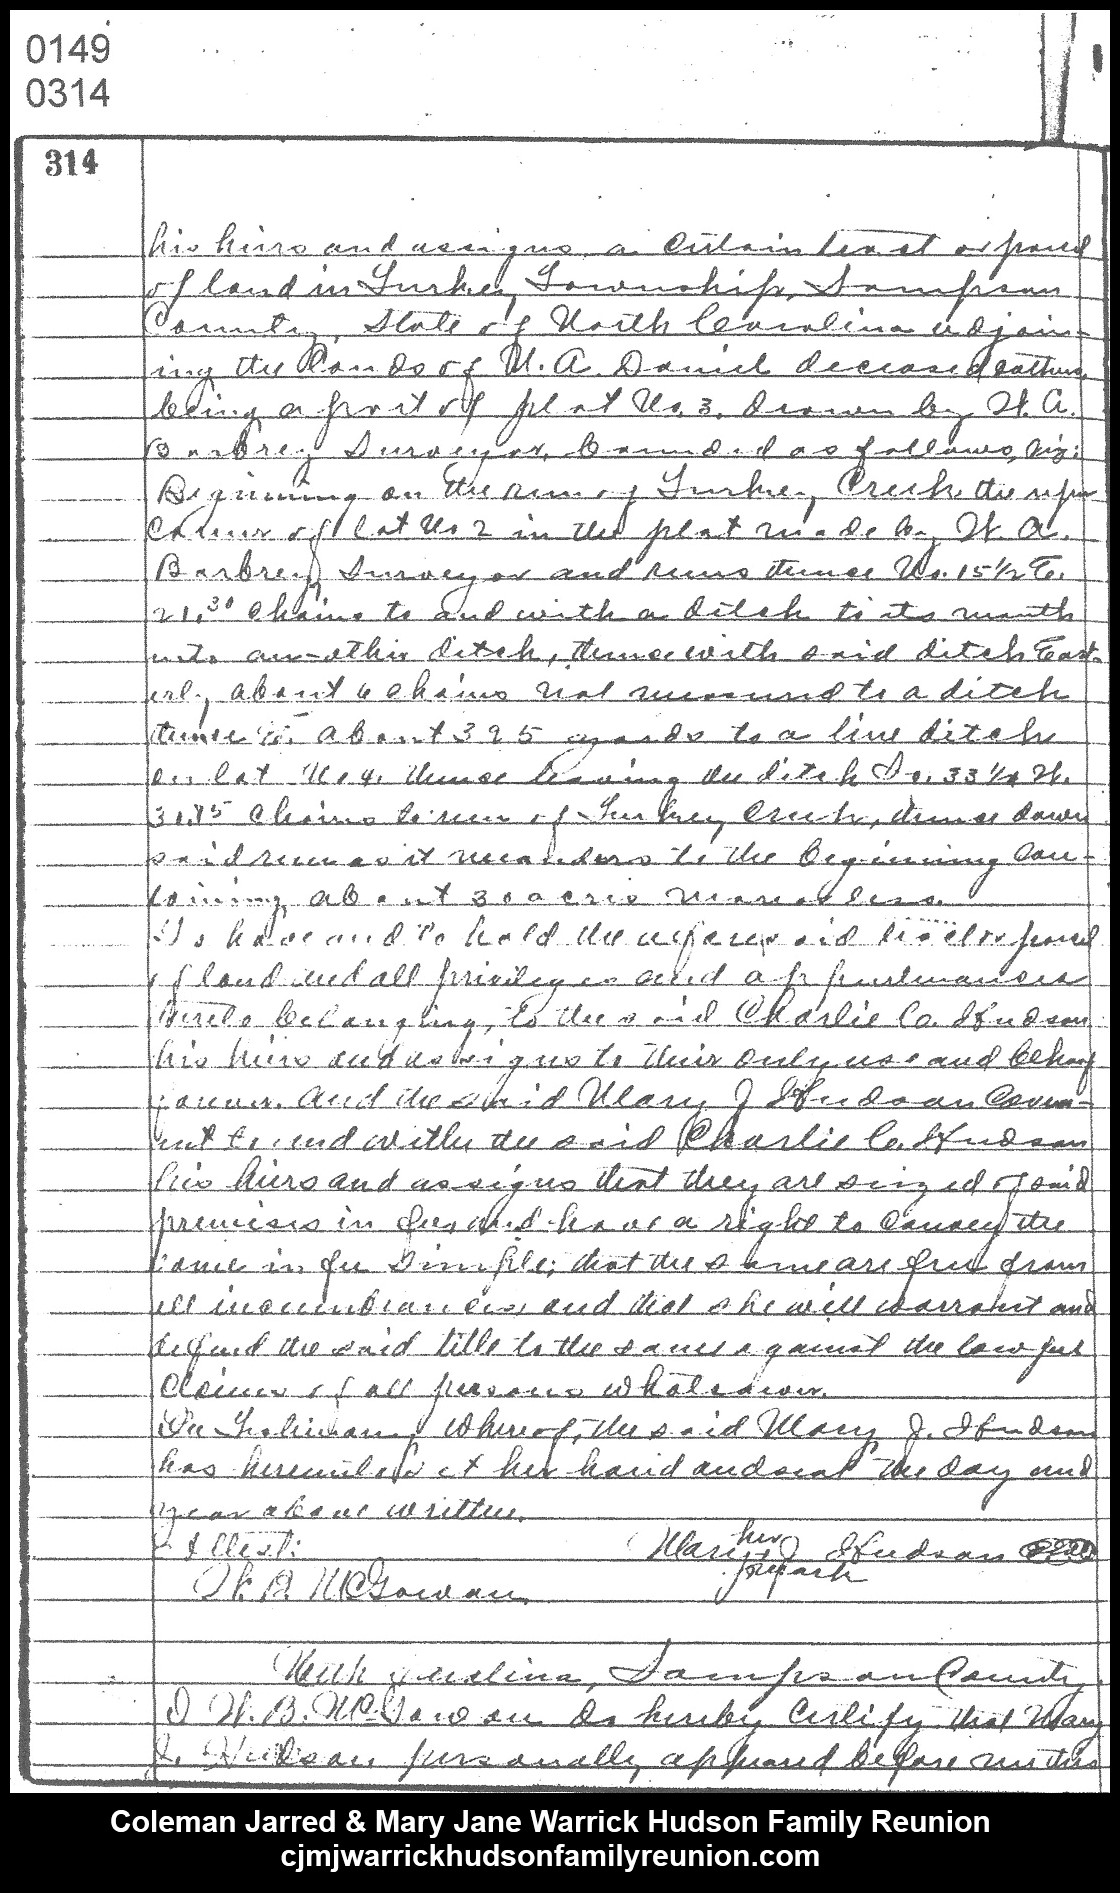 1906, 5-31 - Deed - MJ to Charlie C. Hudson (page 2 of 3)